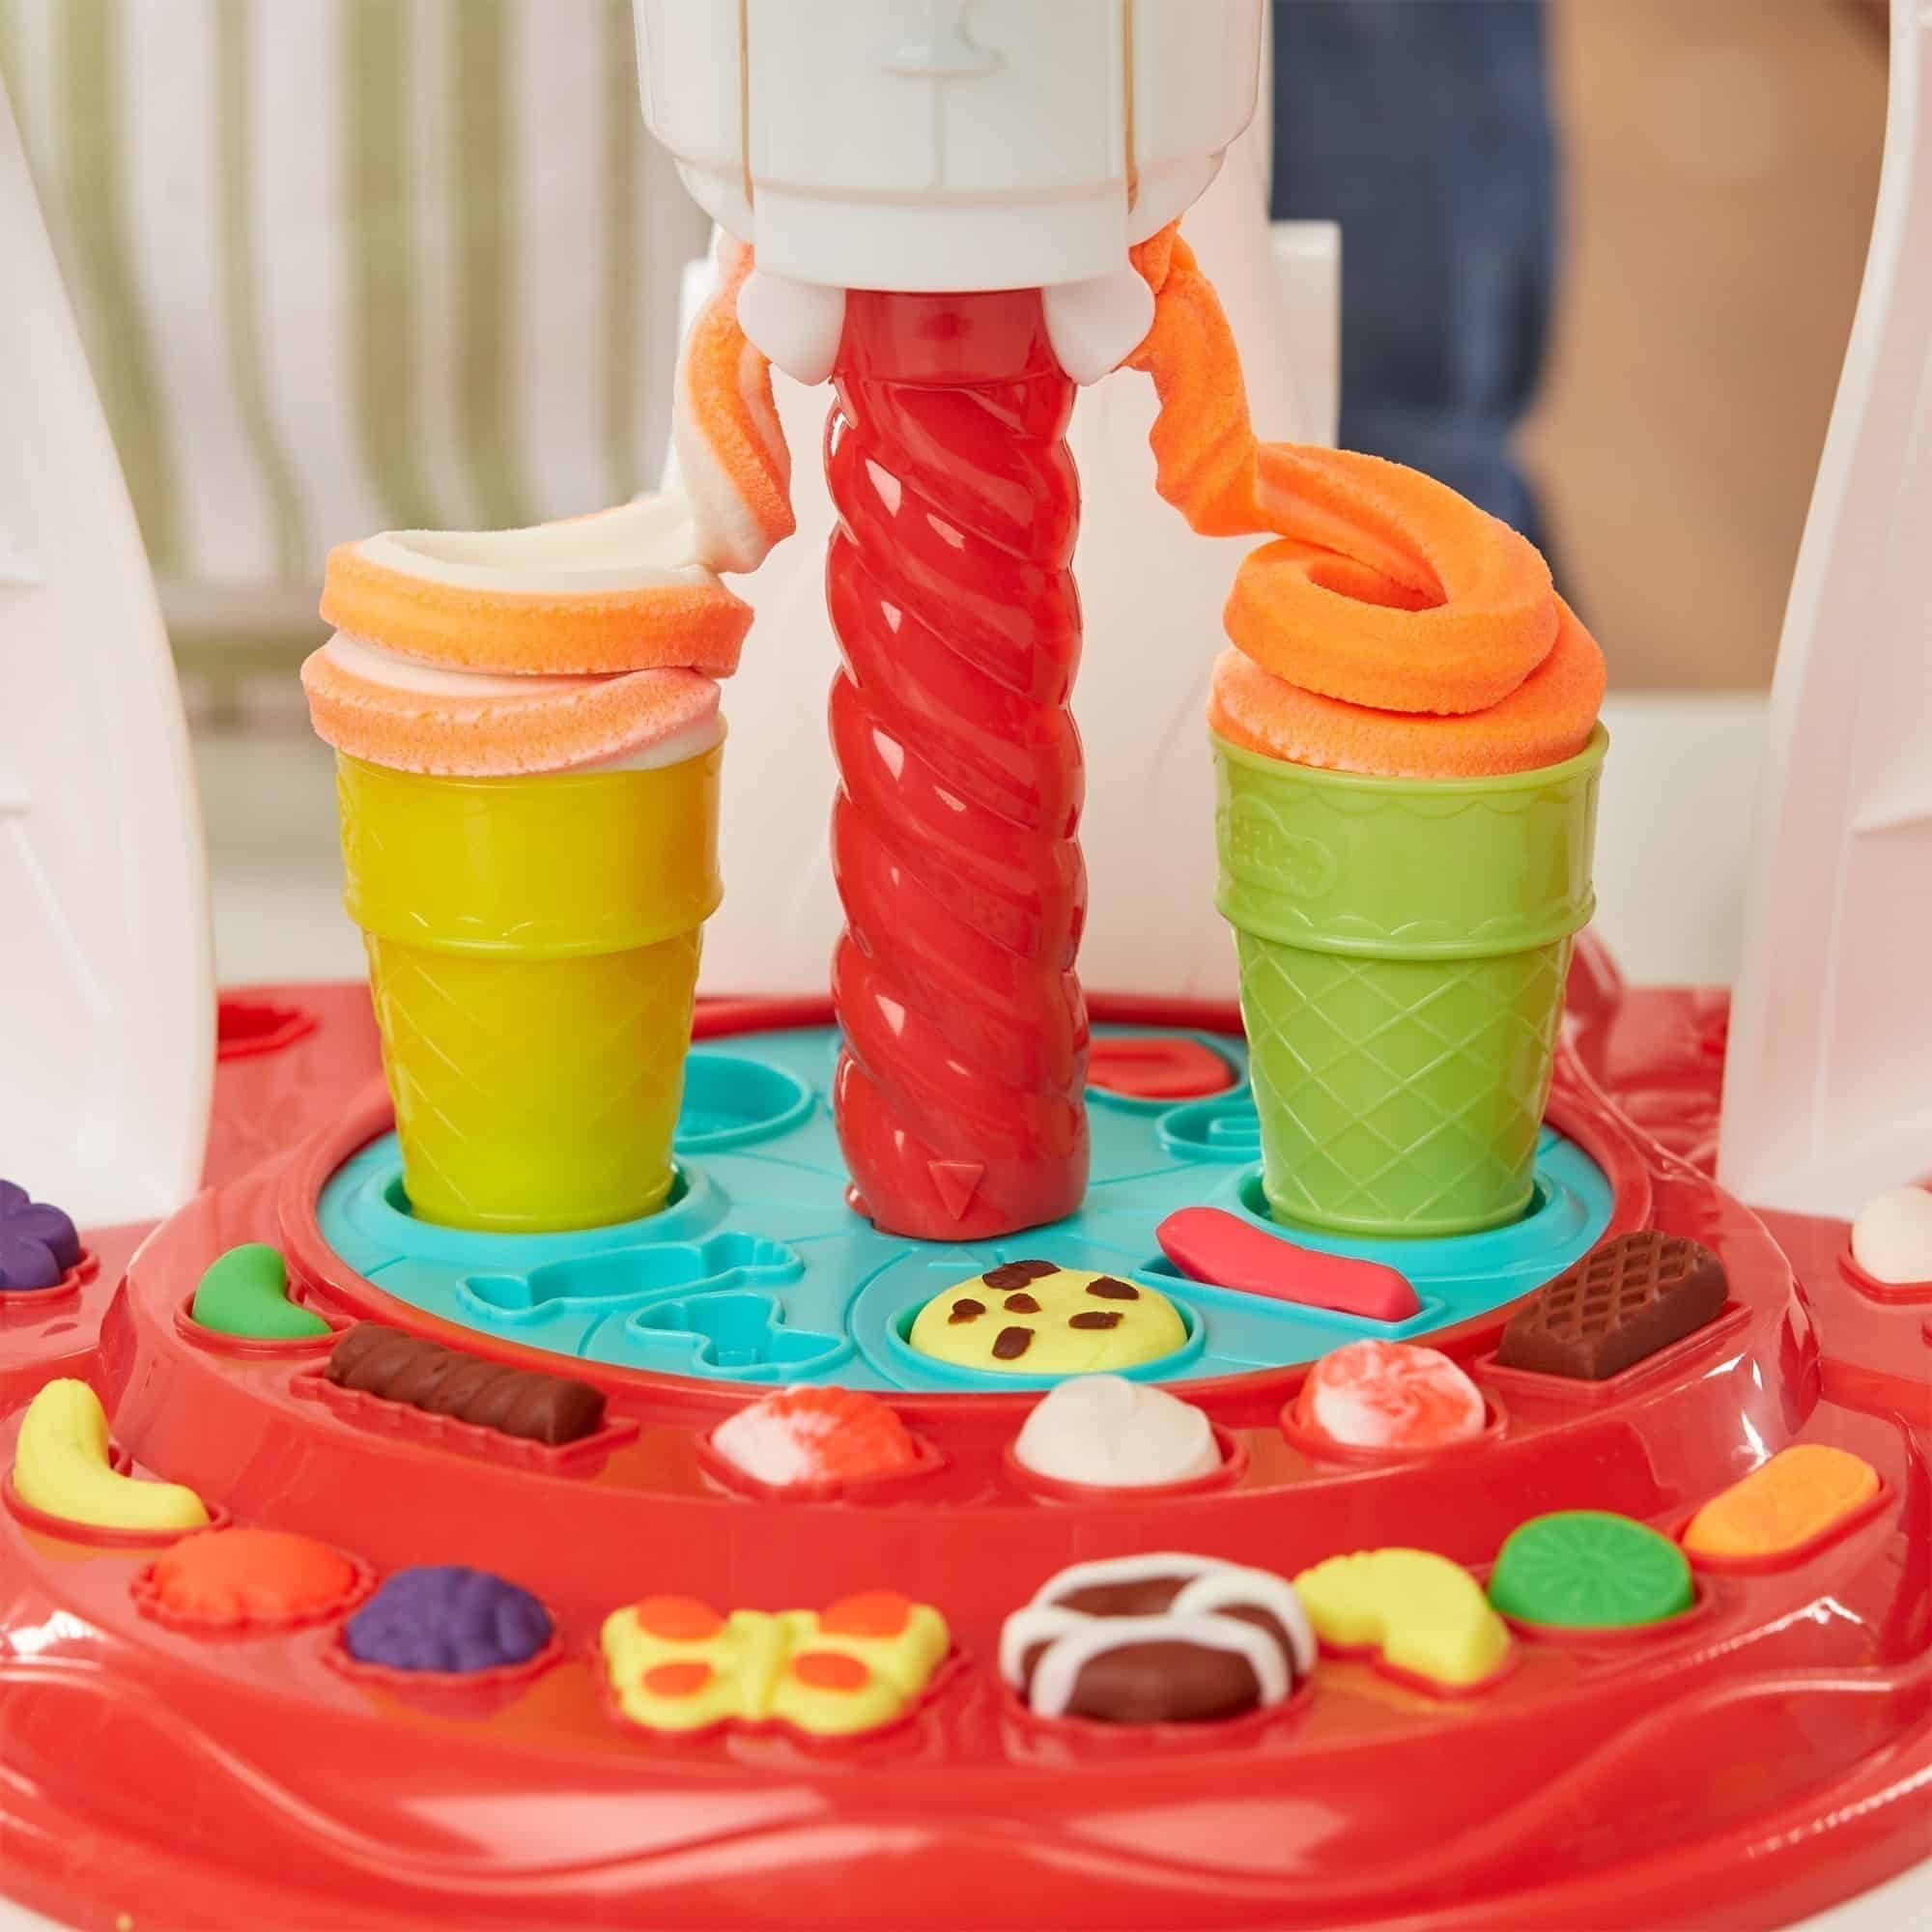 Play-Doh - Kitchen Creations - Ultimate Swirl Ice Cream Maker Play Food Set